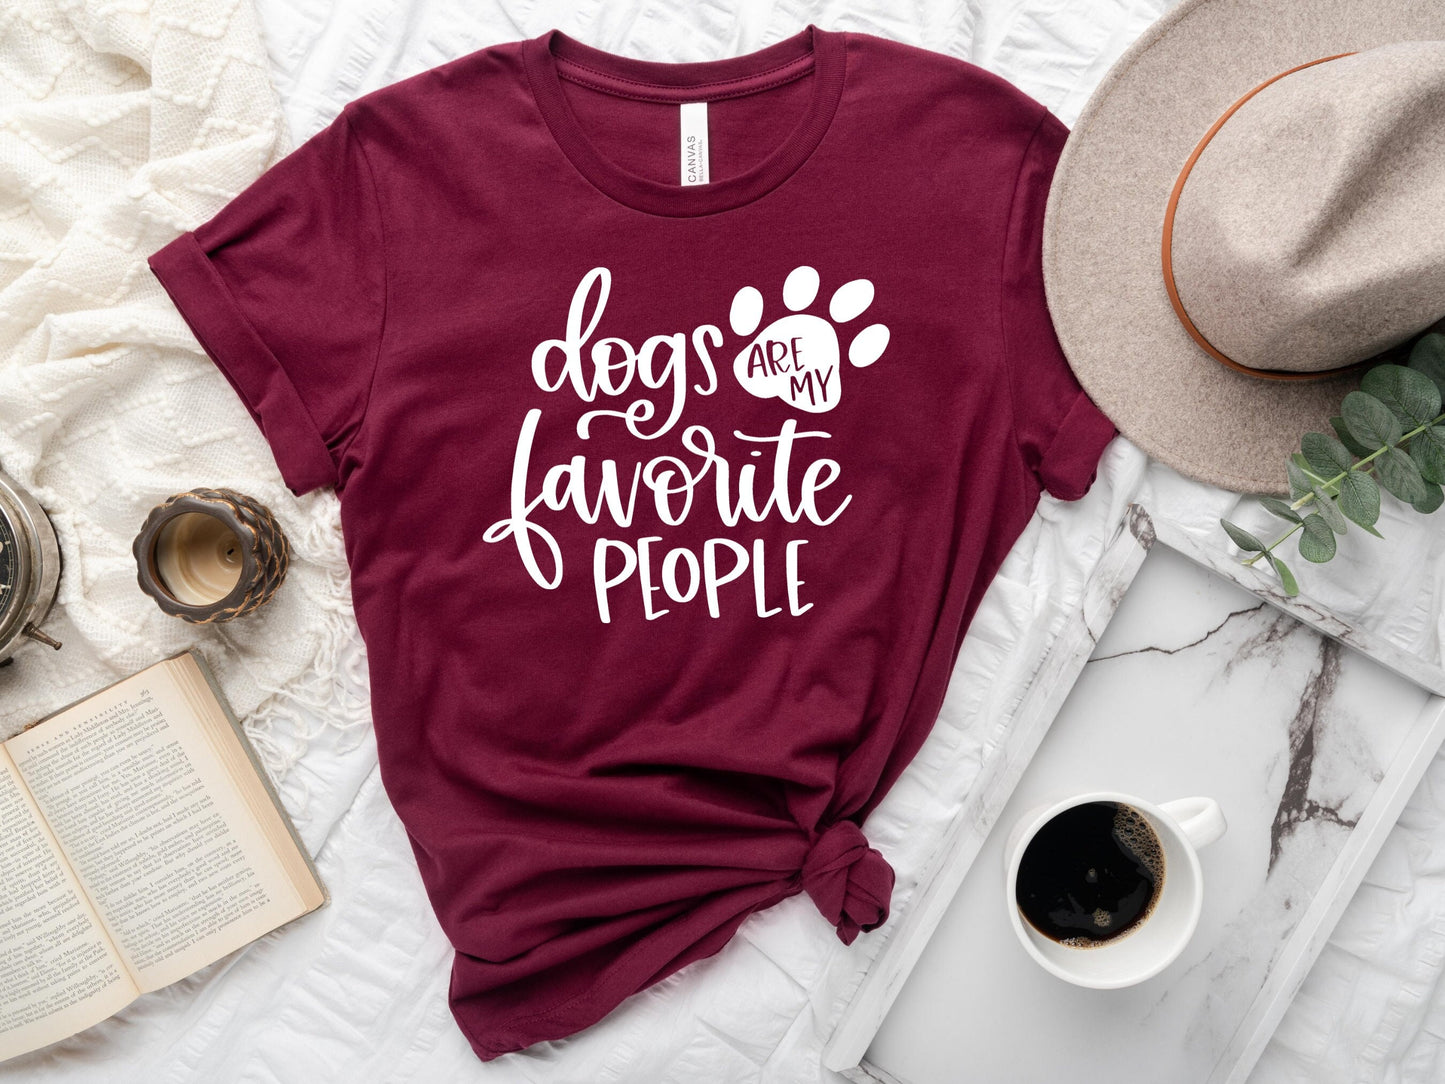 Dogs Are My Favorite People Shirt, Dog Lover Shirt, Dog Shirts, Dog Lover Gift, Dogs Are My Favorite,